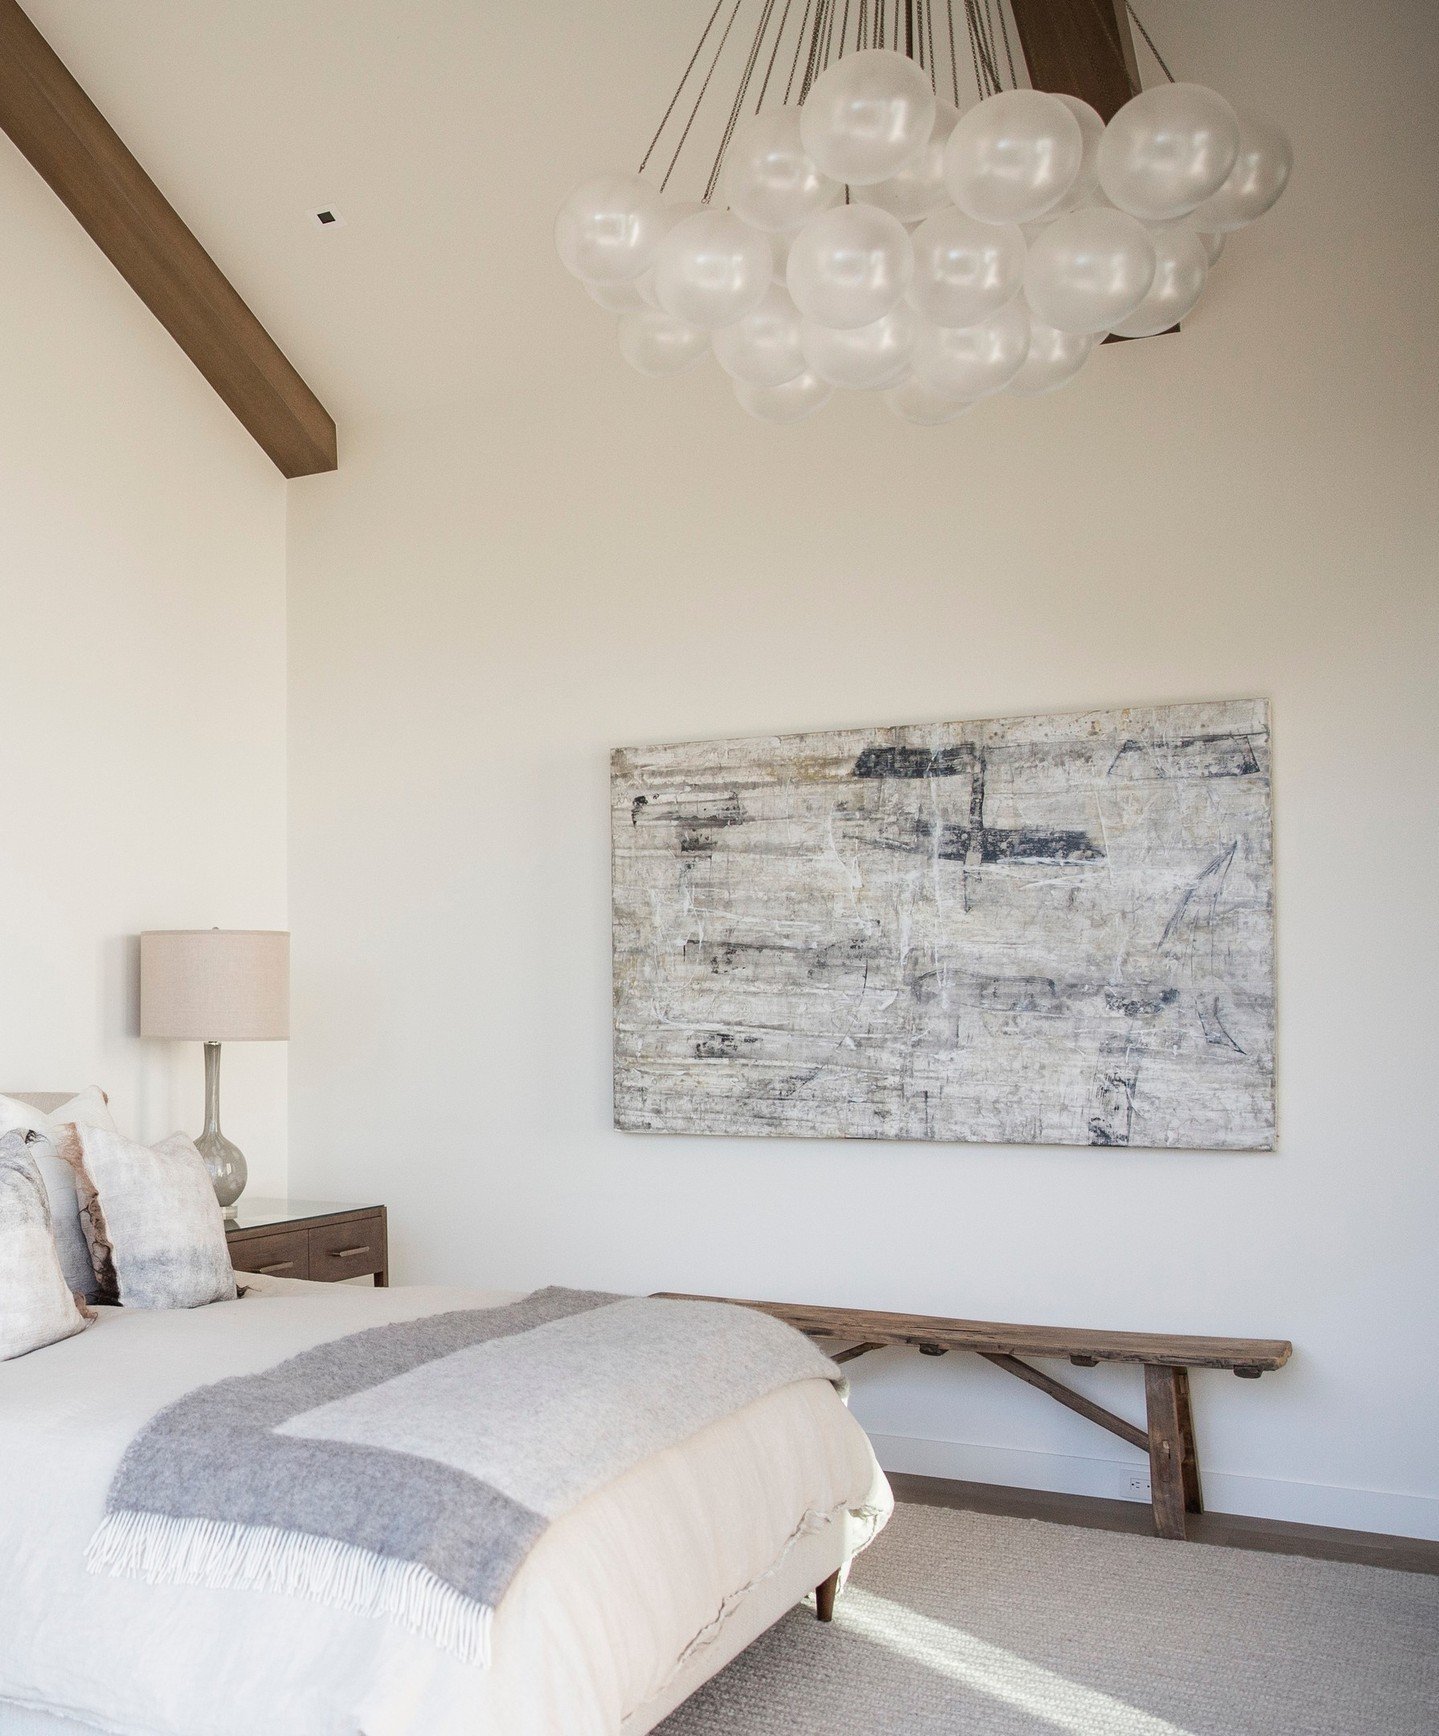 A serene space at #ModernZen.⁠
⁠
#interiordesign #customhome #dreambedroom #serenespace #peacefulhome